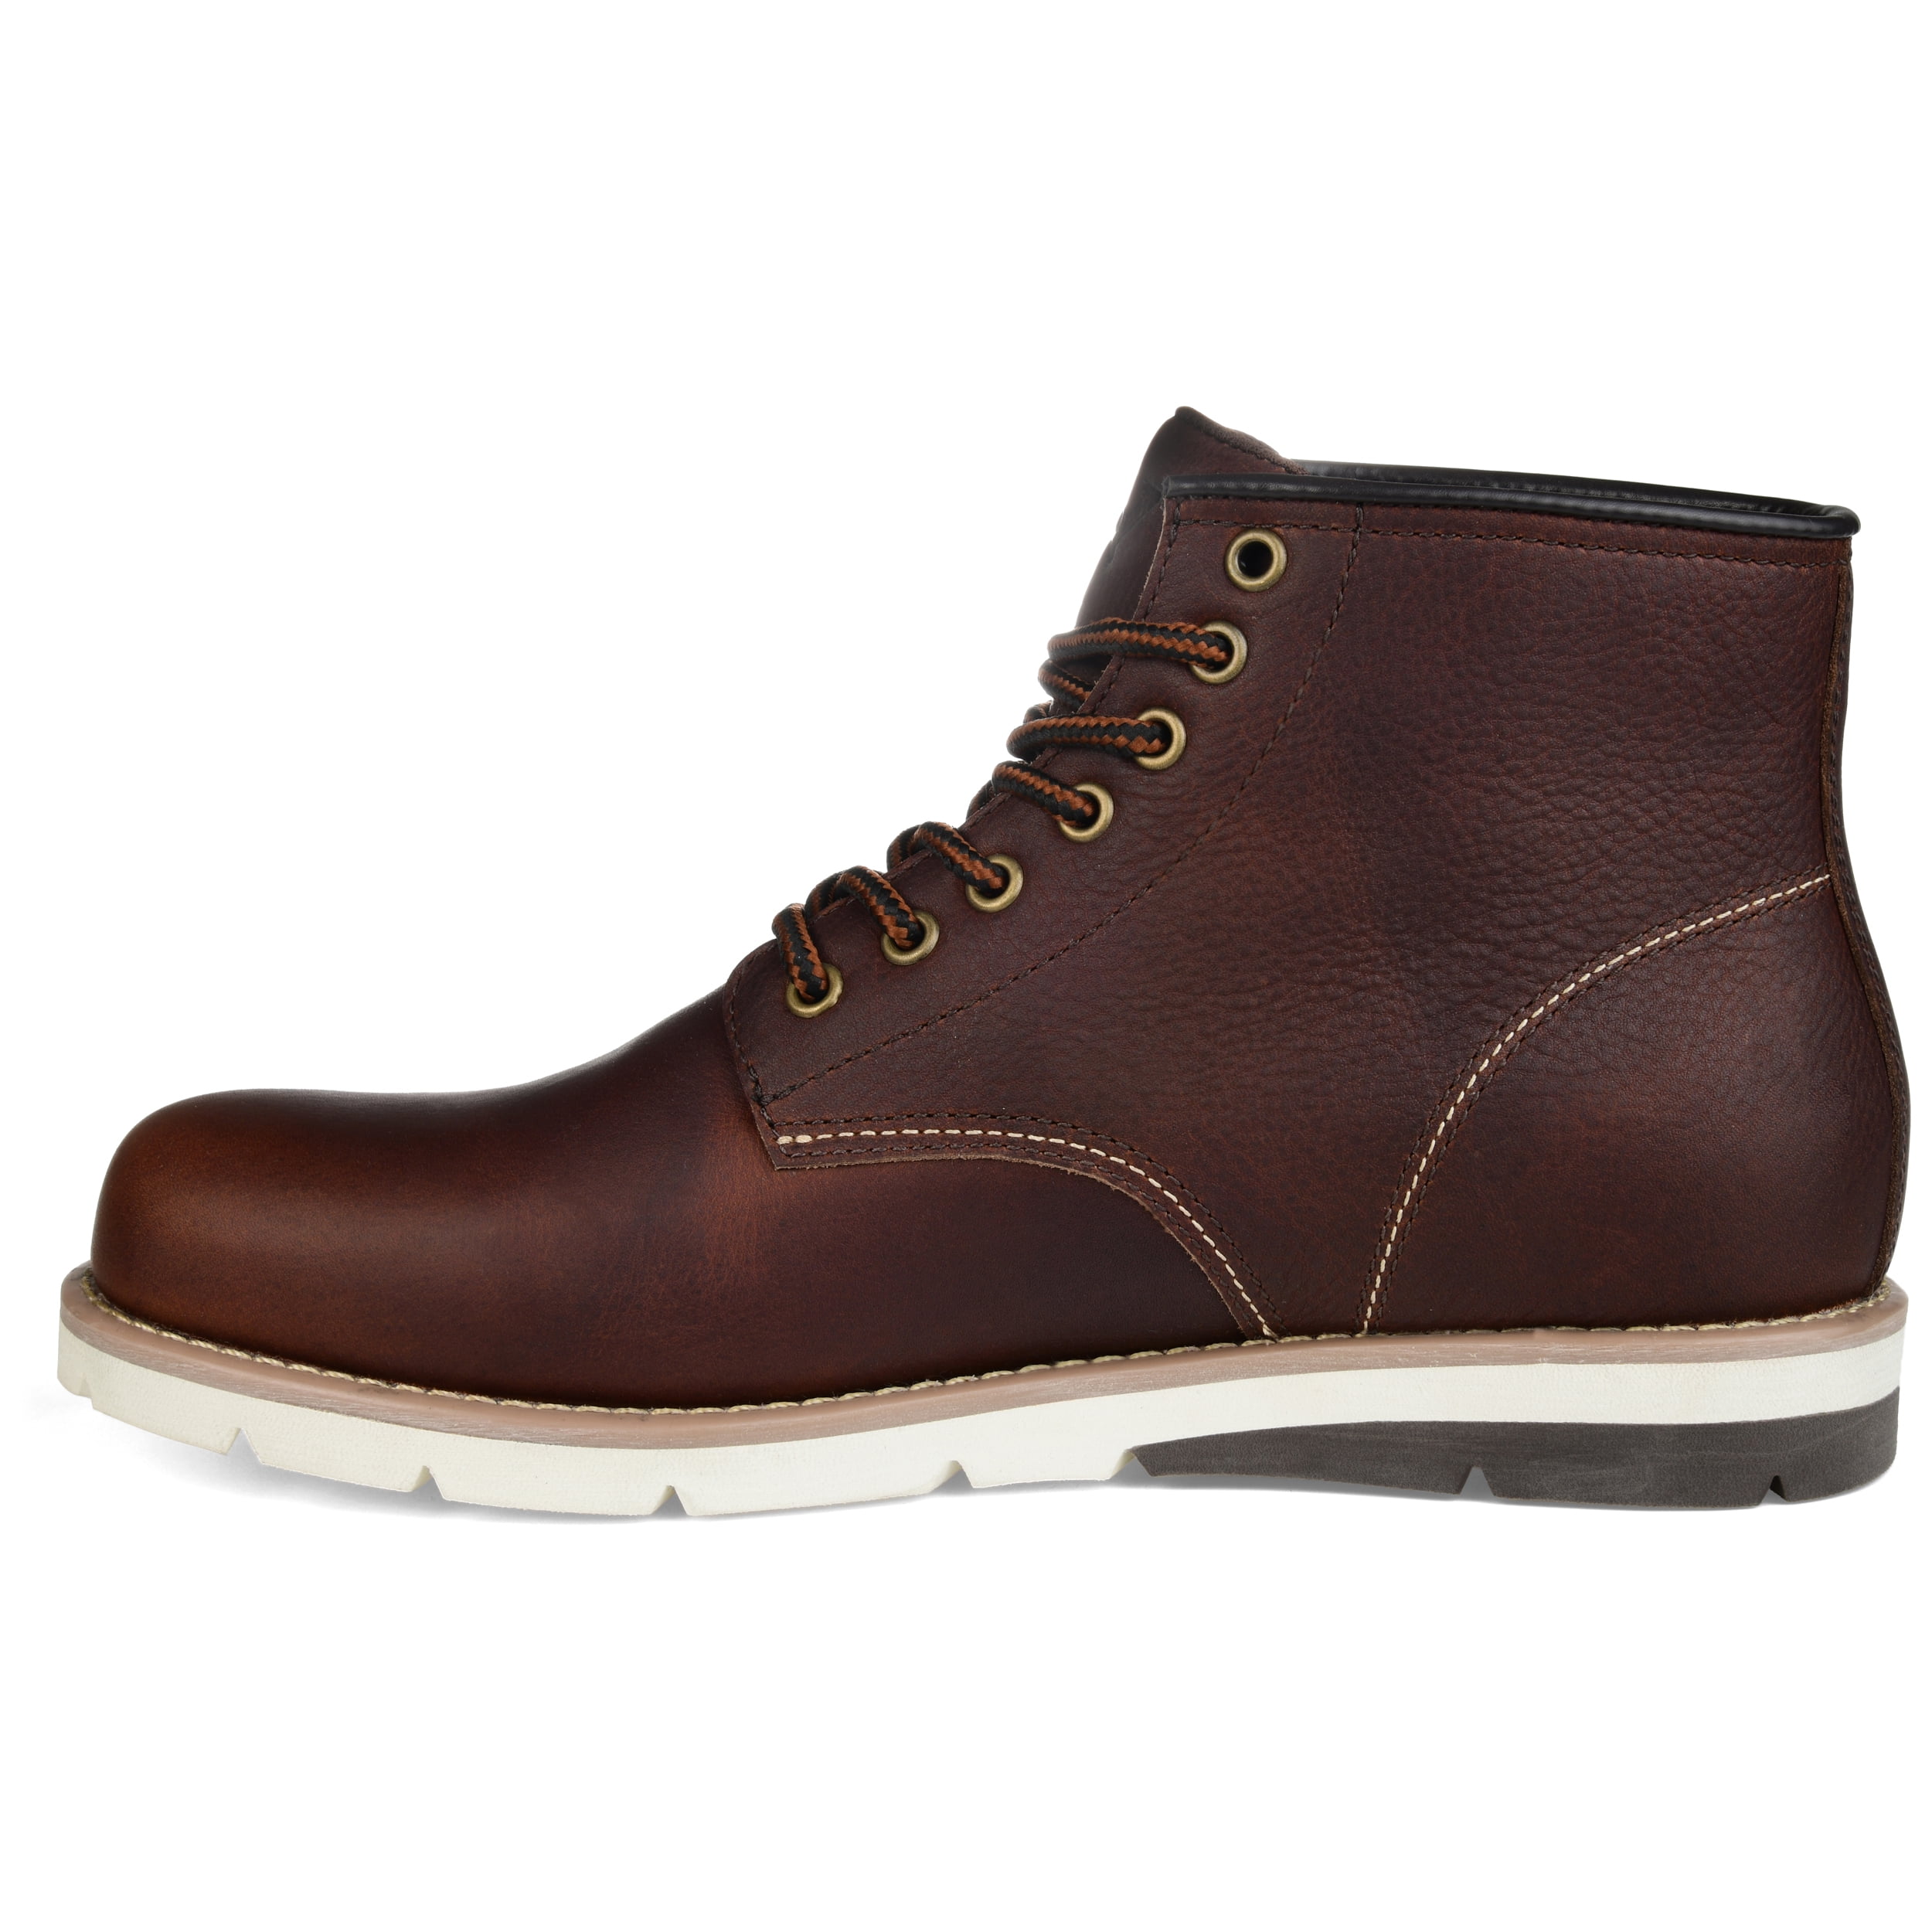 mens ankle boots wide width